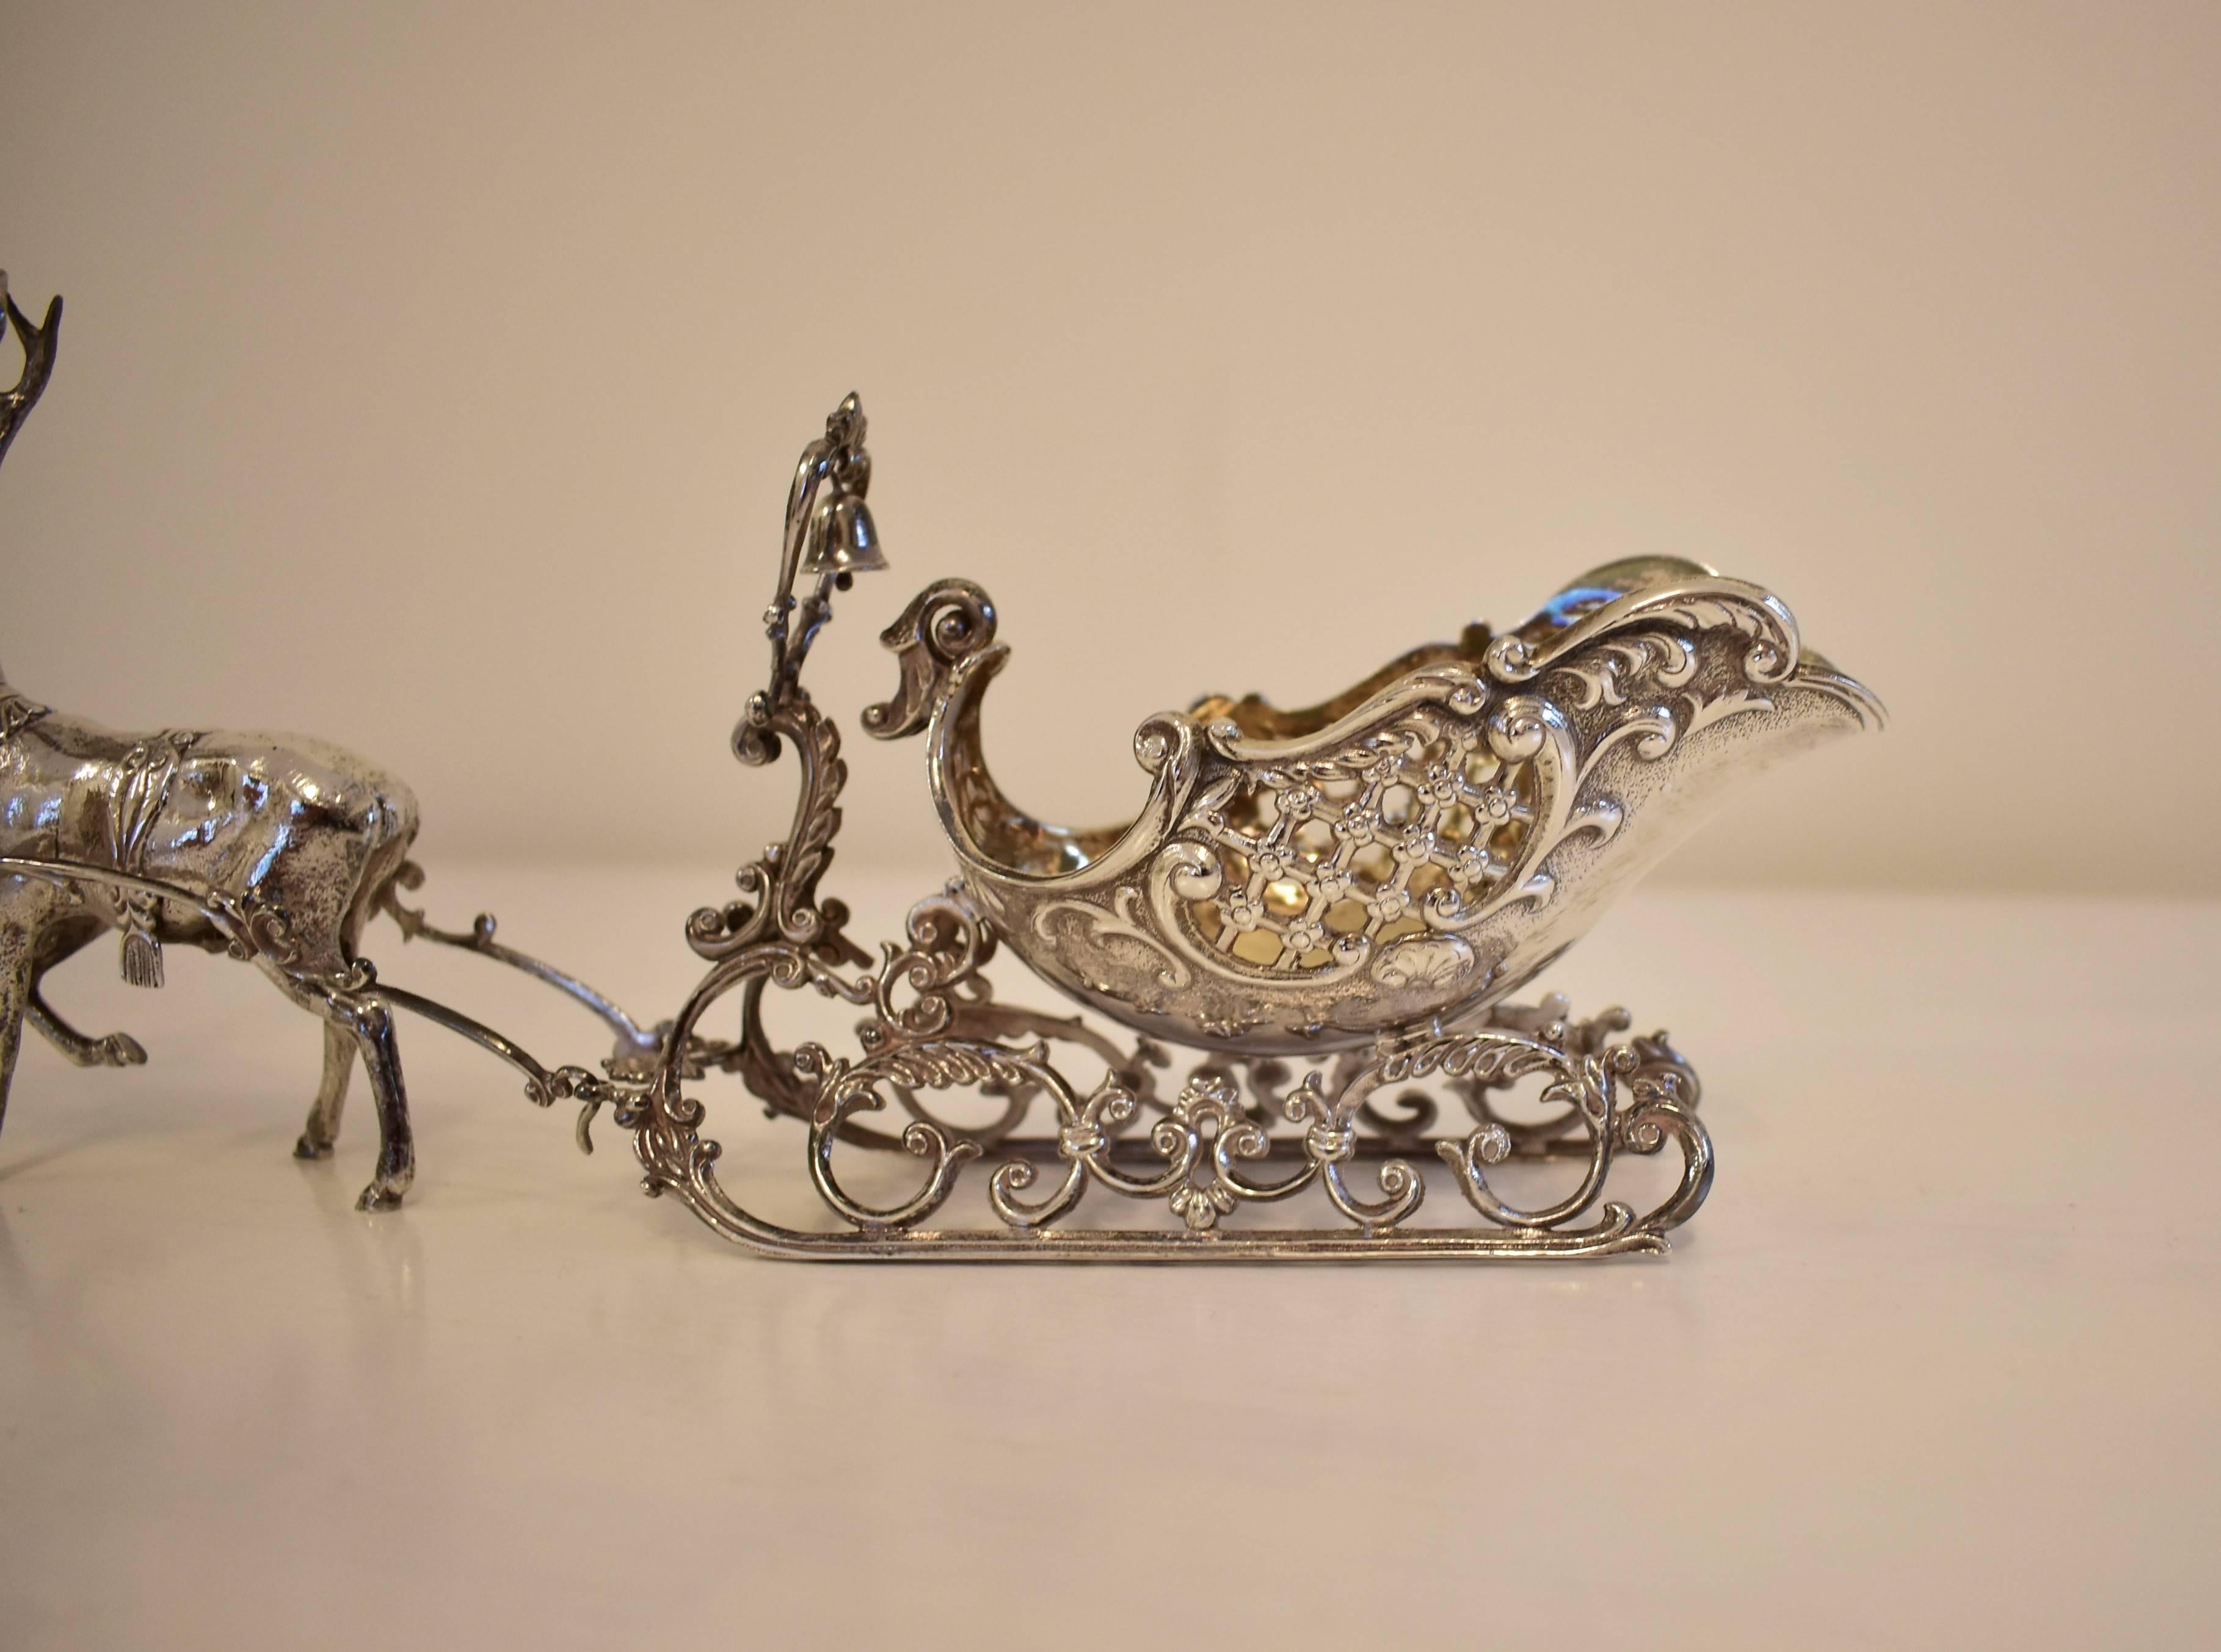 Cast 20th Century Silver Sleigh and Reindeer with Gilt Detail, Objet D'art, Sculpture For Sale